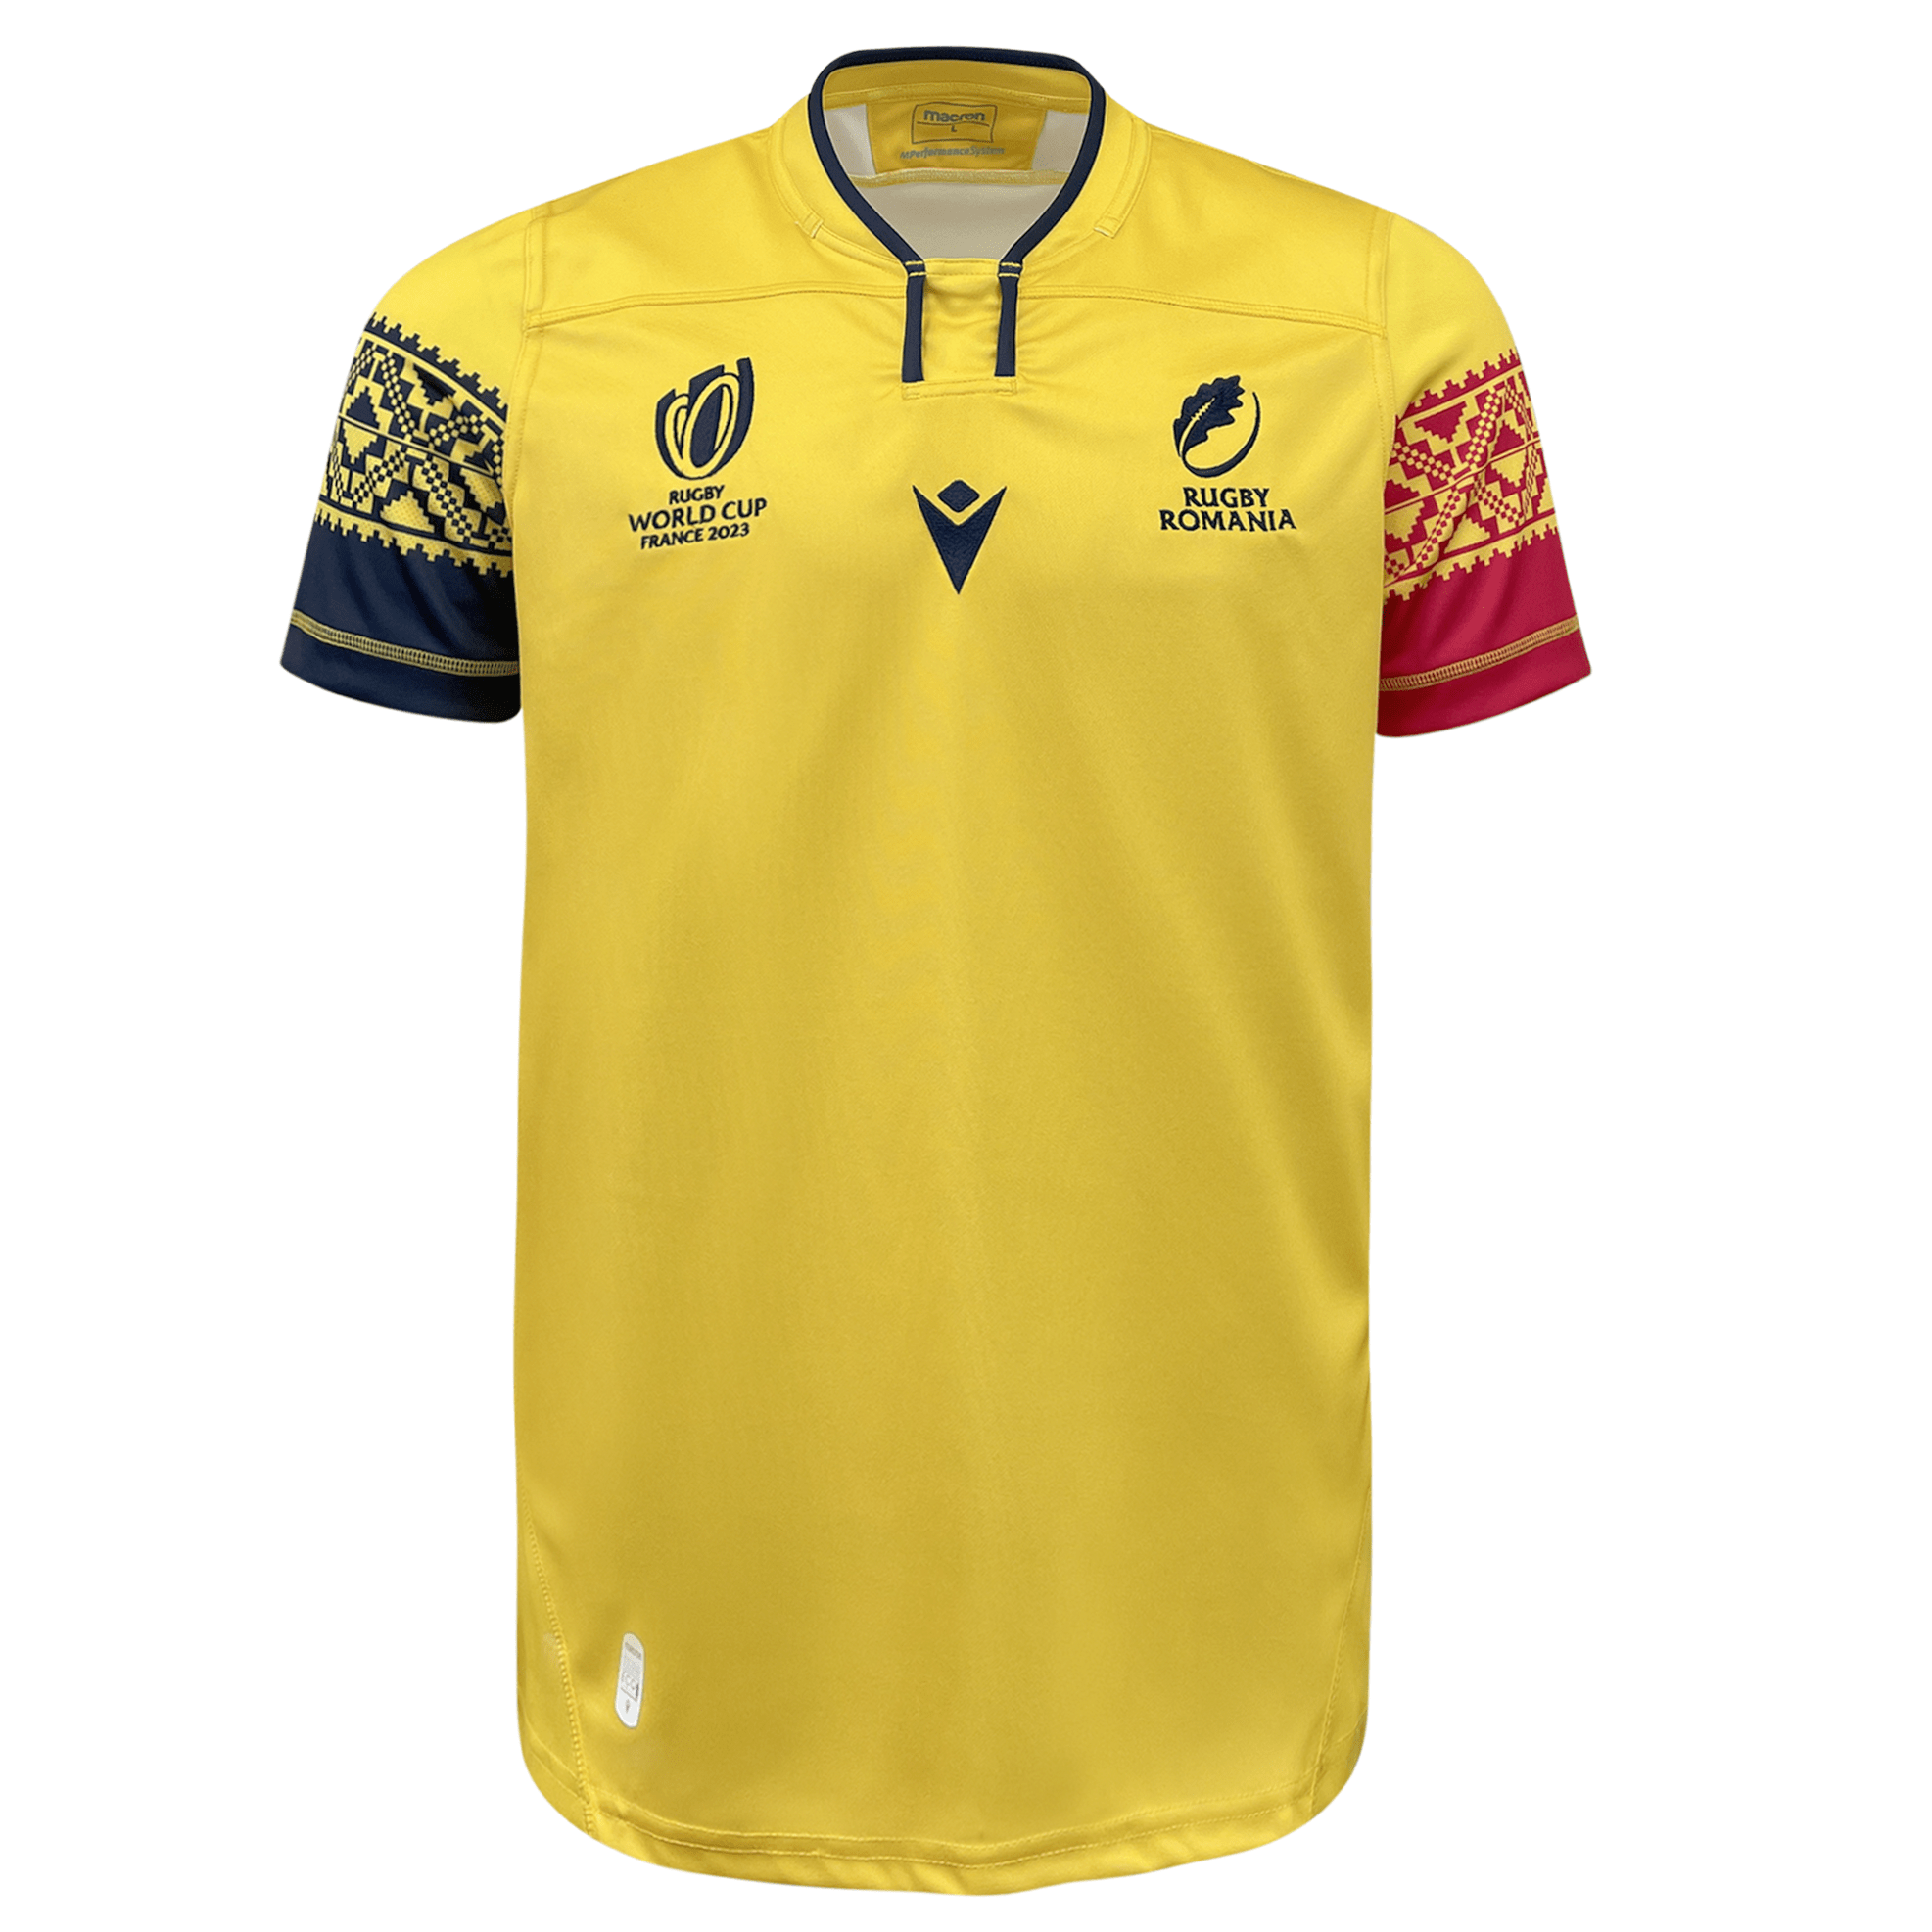 All the 2023 Rugby World Cup jerseys - home and alternate